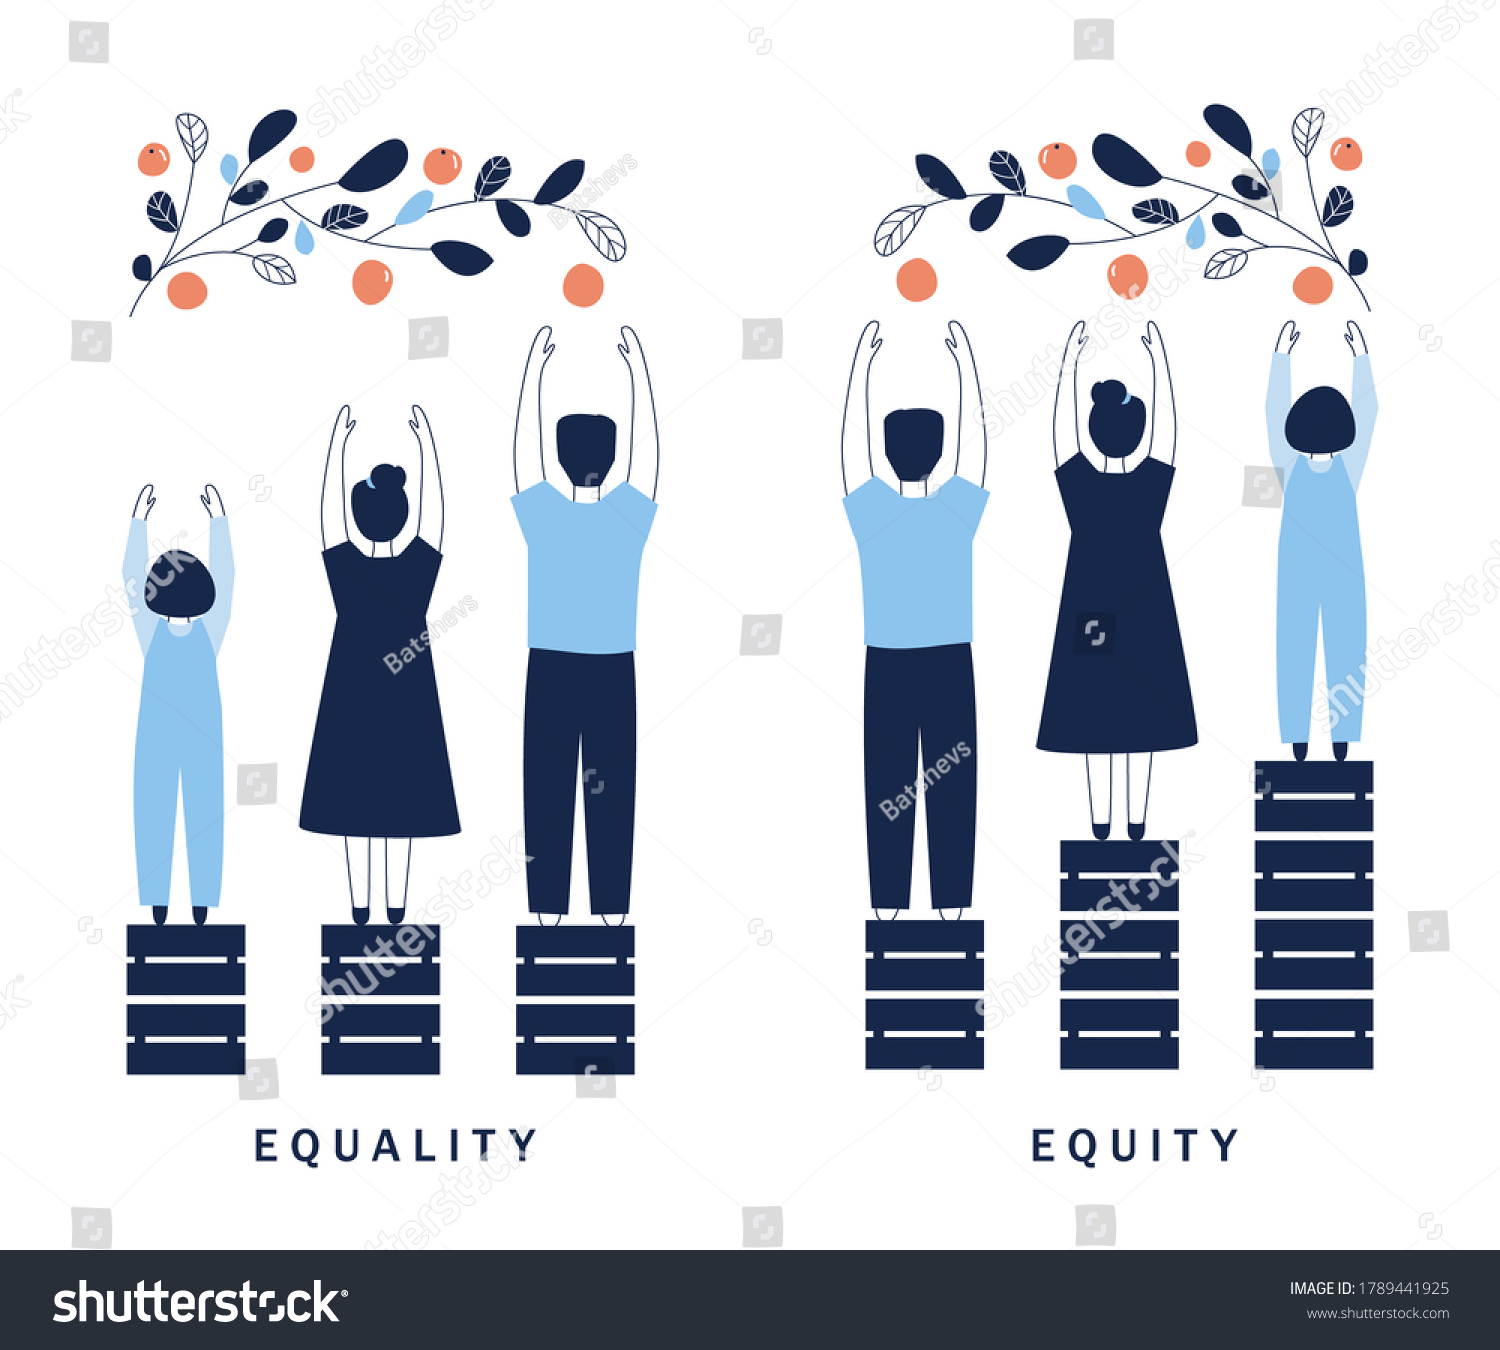 Equality and Equity Concept Illustration. Human Rights, Equal Opportunities and Respective Needs. Modern Design Vector Illustration #1789441925